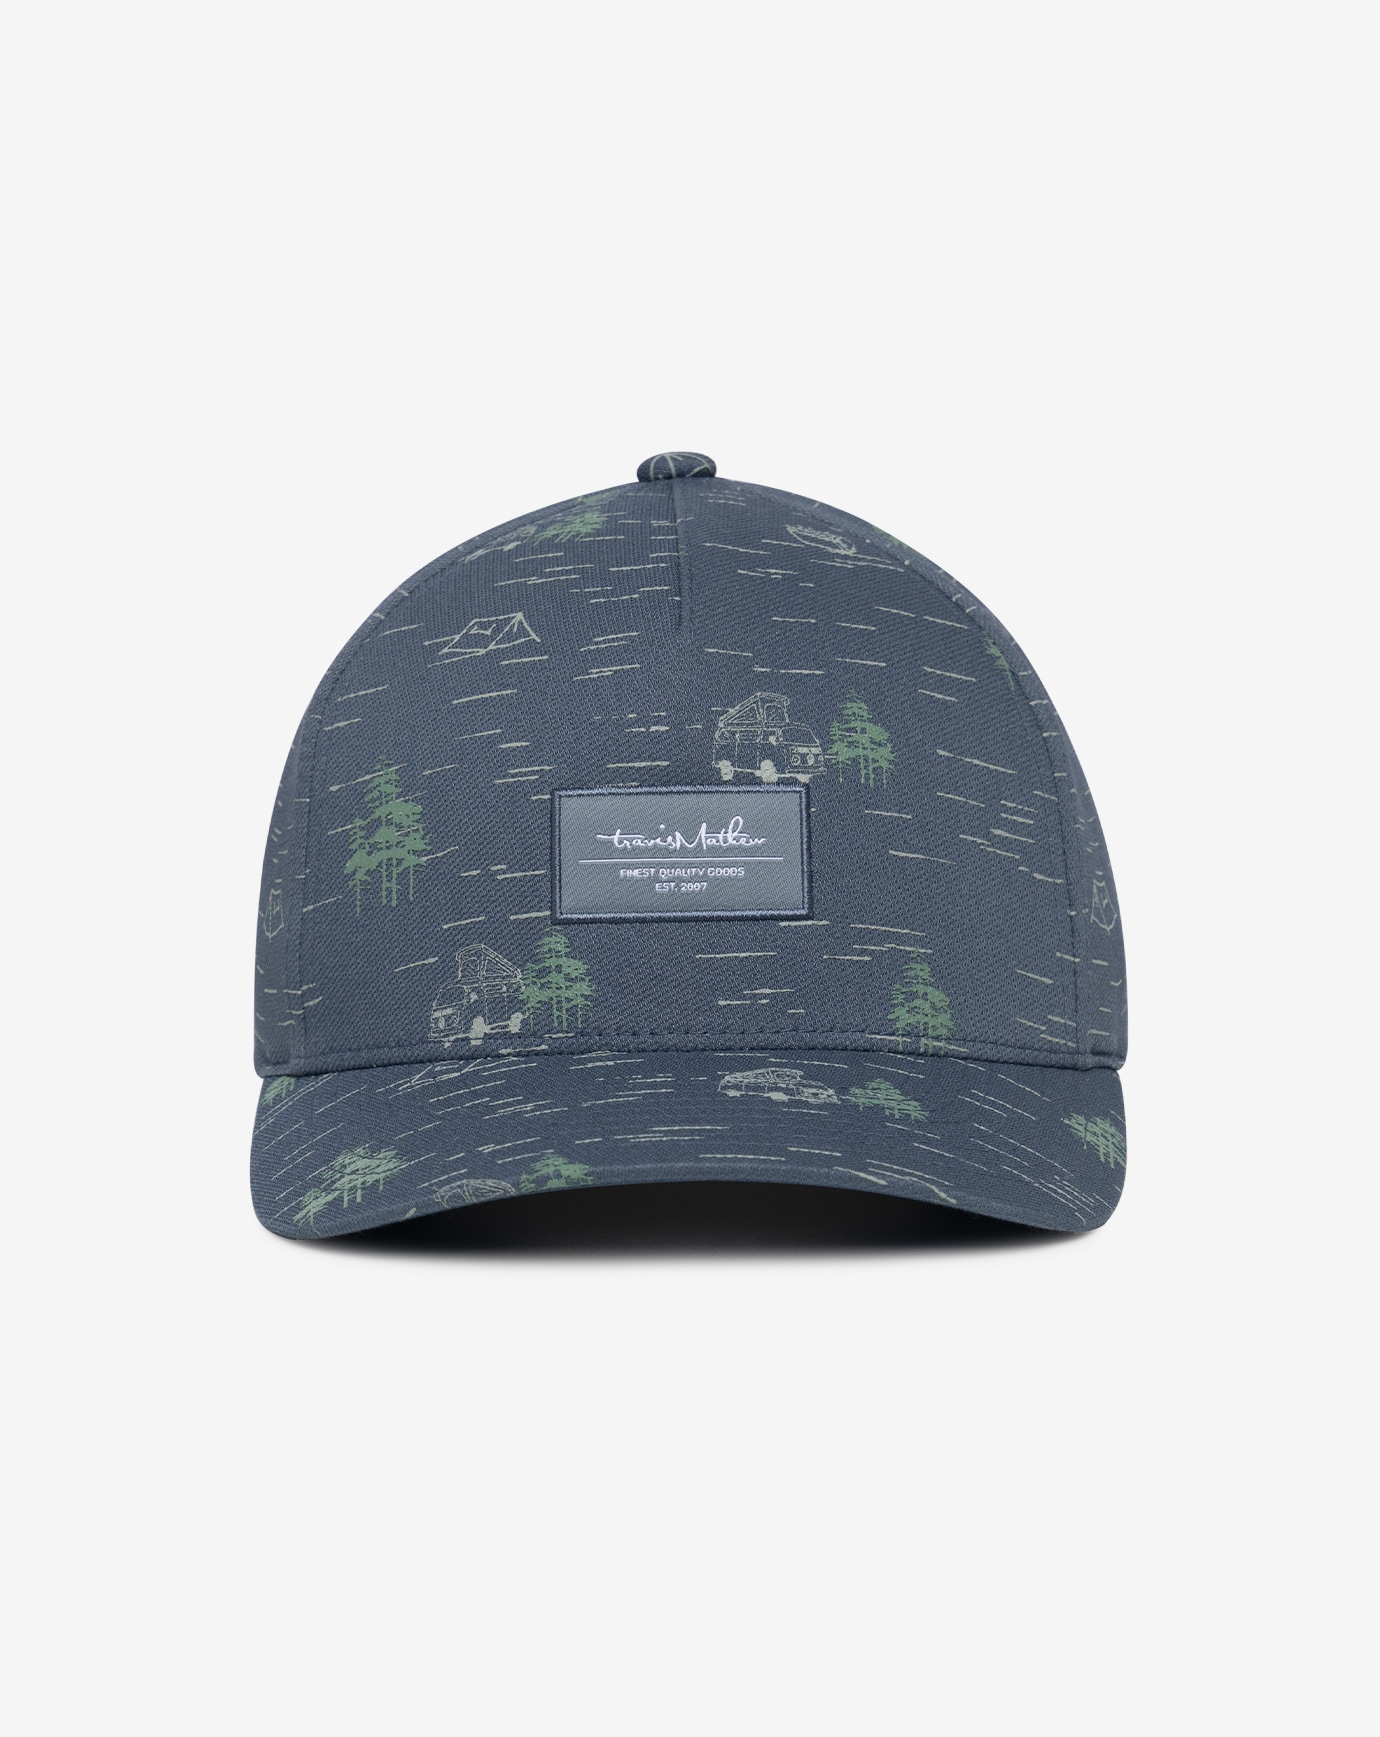 Related Product - MATCH POINT SNAPBACK HAT